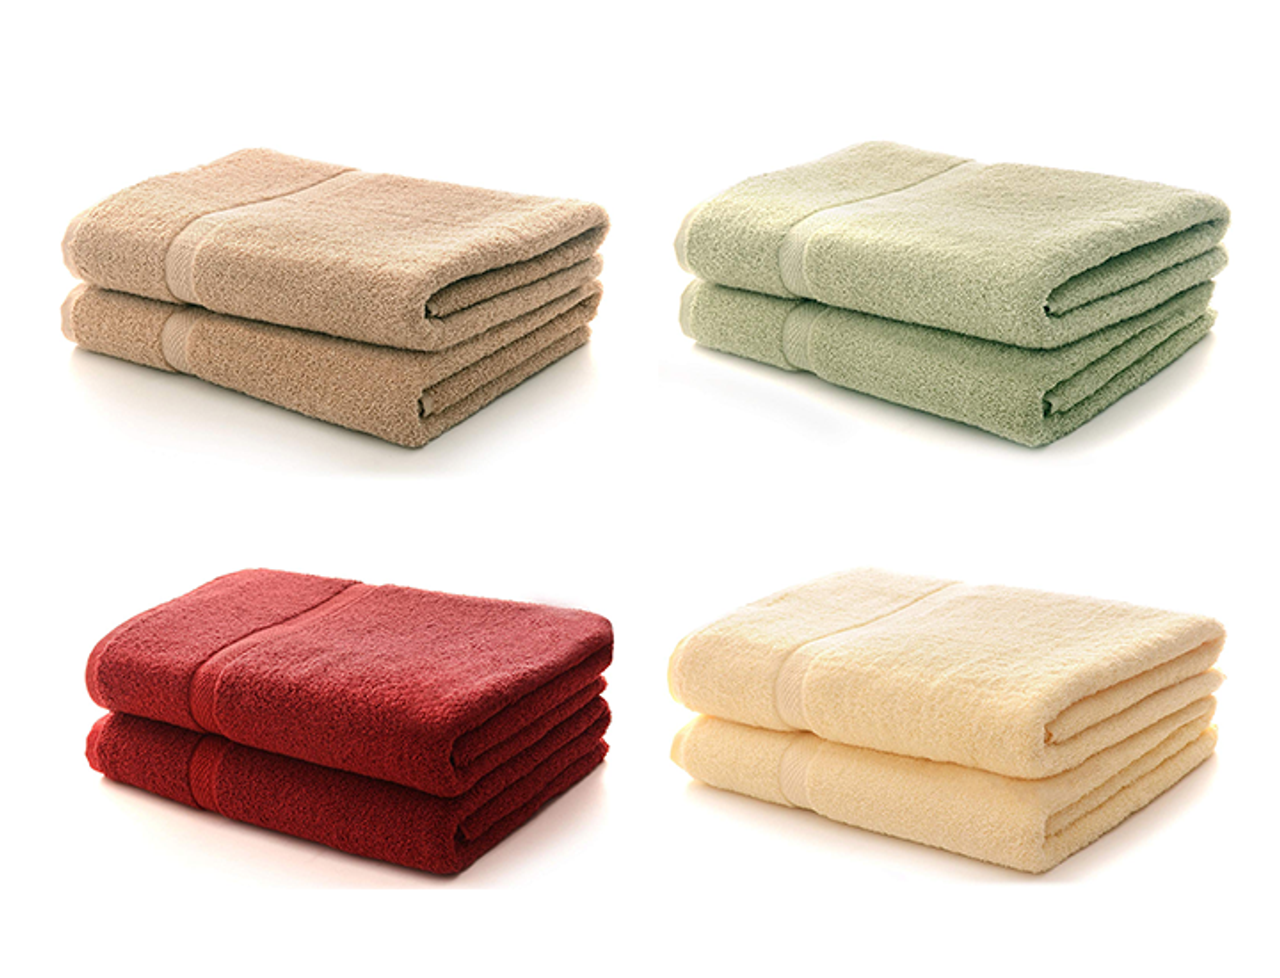 Cheer Collection Super Soft Absorbent Solid Color Bath Towels (Set of 2) White